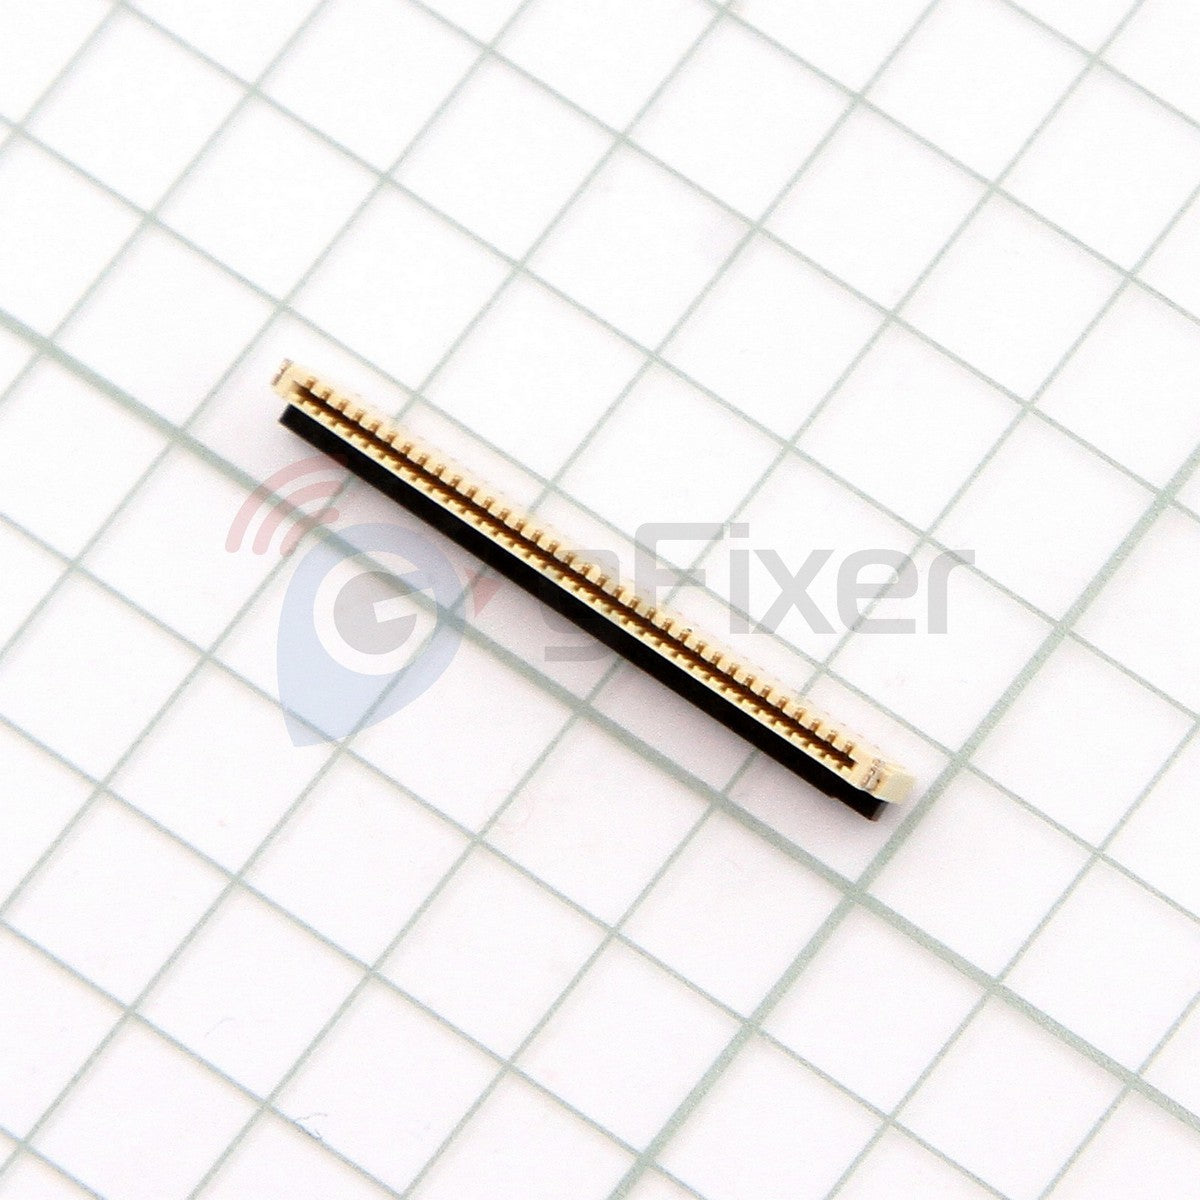 New LCD connector for PCB Garmin Montana 600, 650, 650t, 610, 680, 680t 67-pin